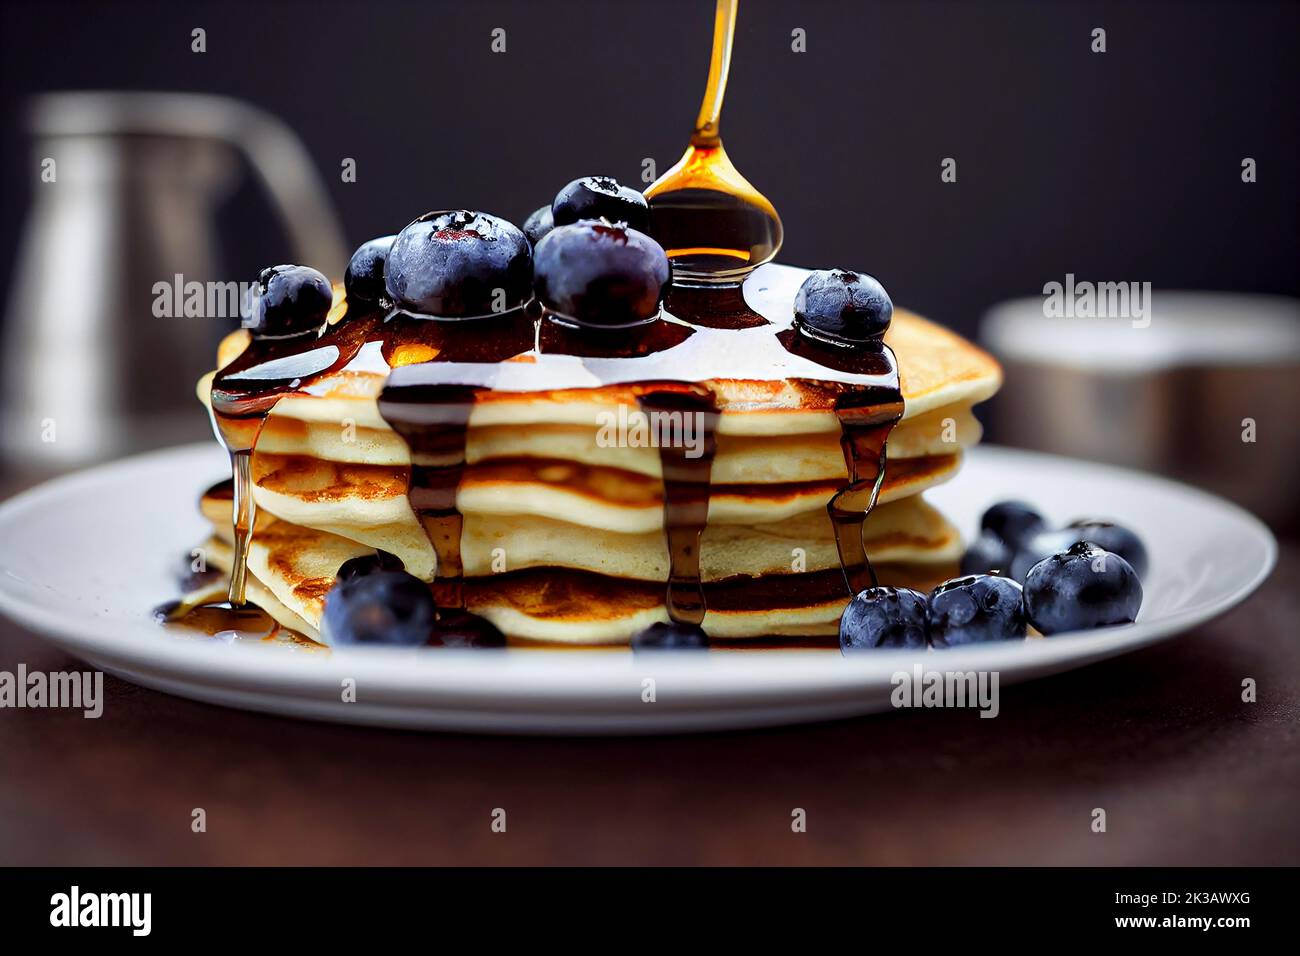 Maple syrup dripping onto a stack of blueberry pancakes, traditional breakfast or brunch, food photography and illustration Stock Photo